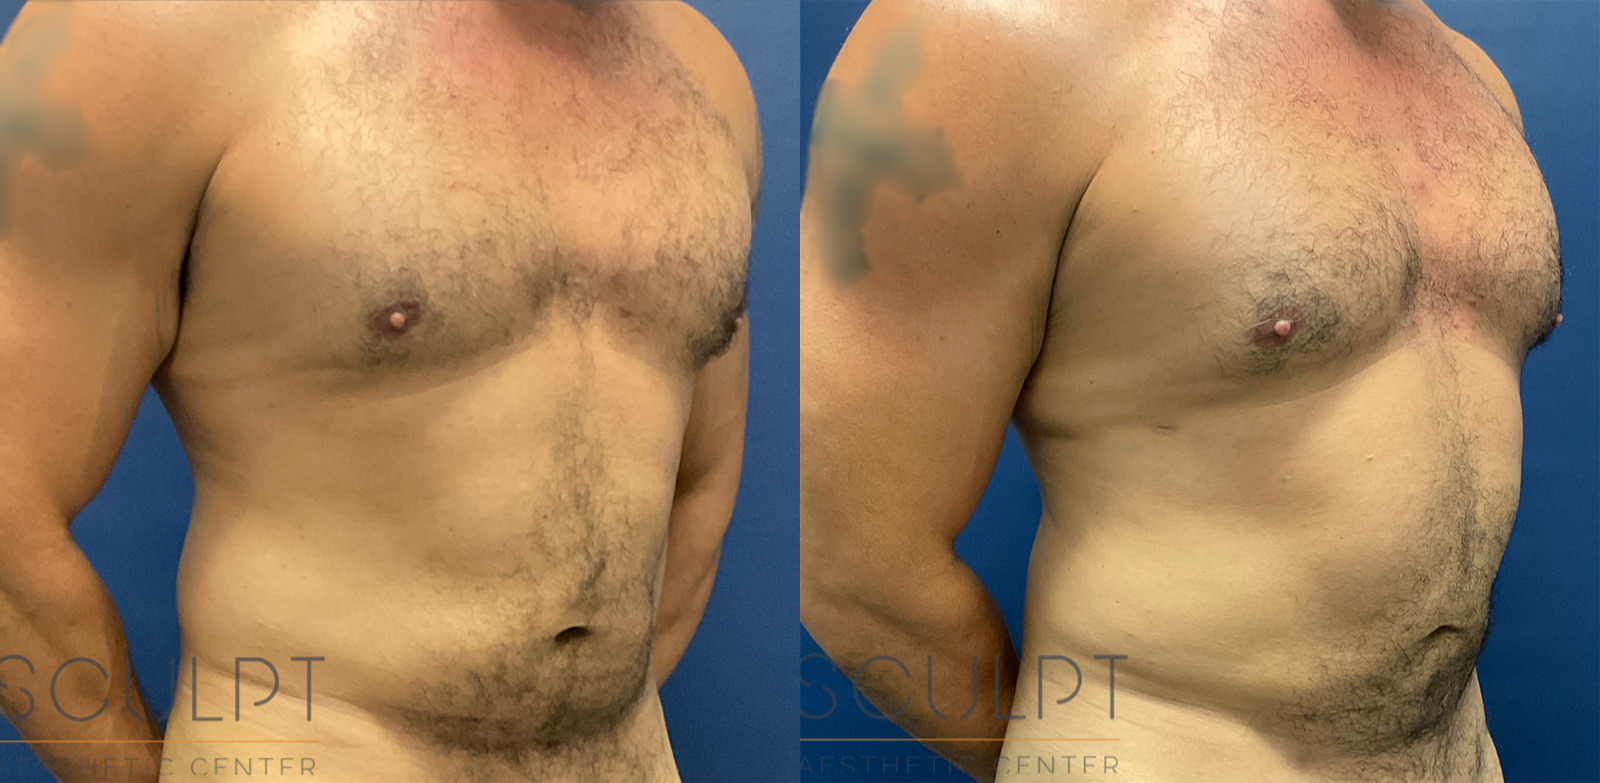 Male Liposuction Before and After Photo by Sculpt Aesthetic Center in Frisco, TX